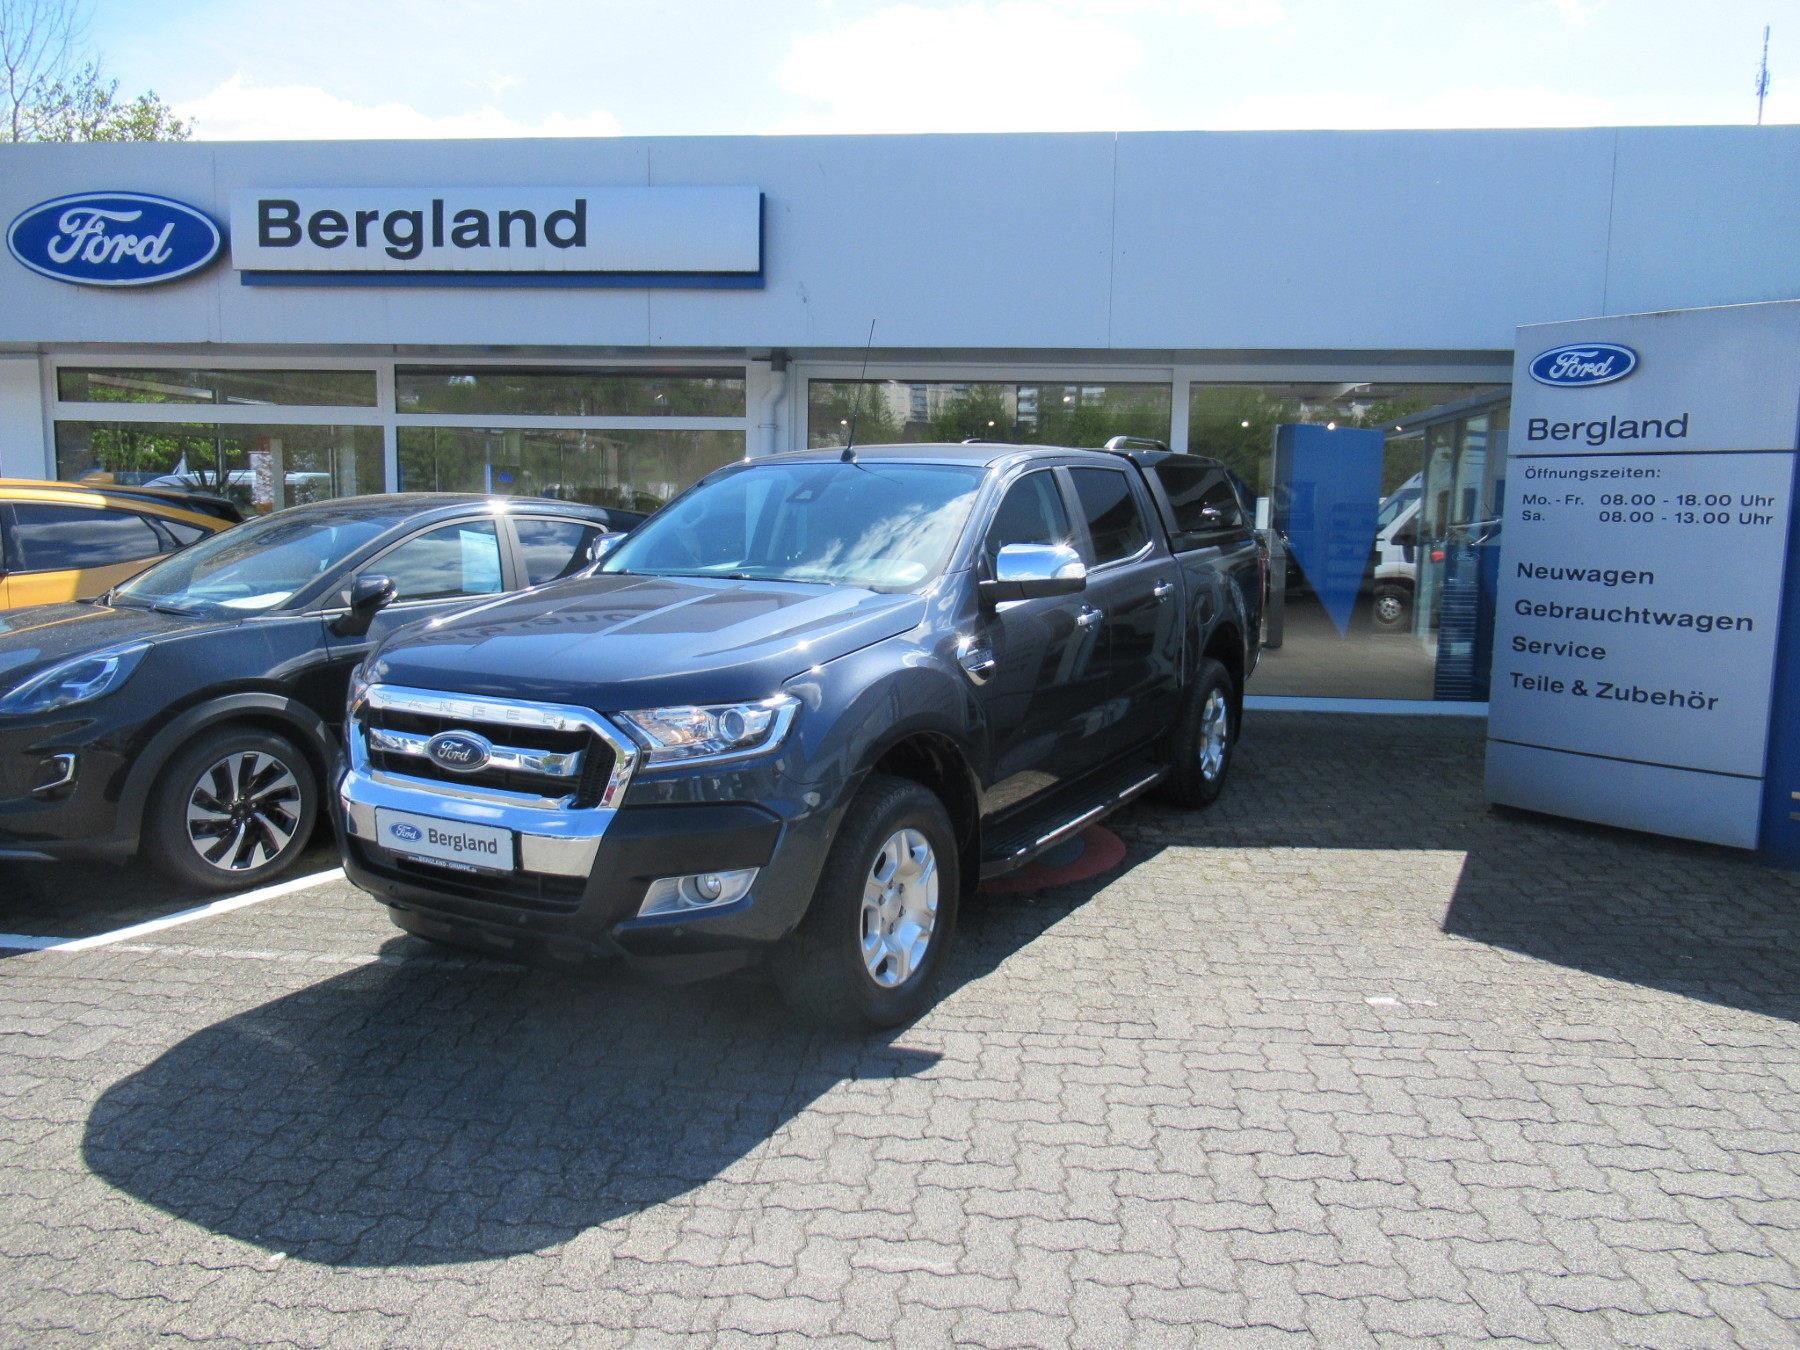 FORD Limited 3,2l TDCi 200 PS